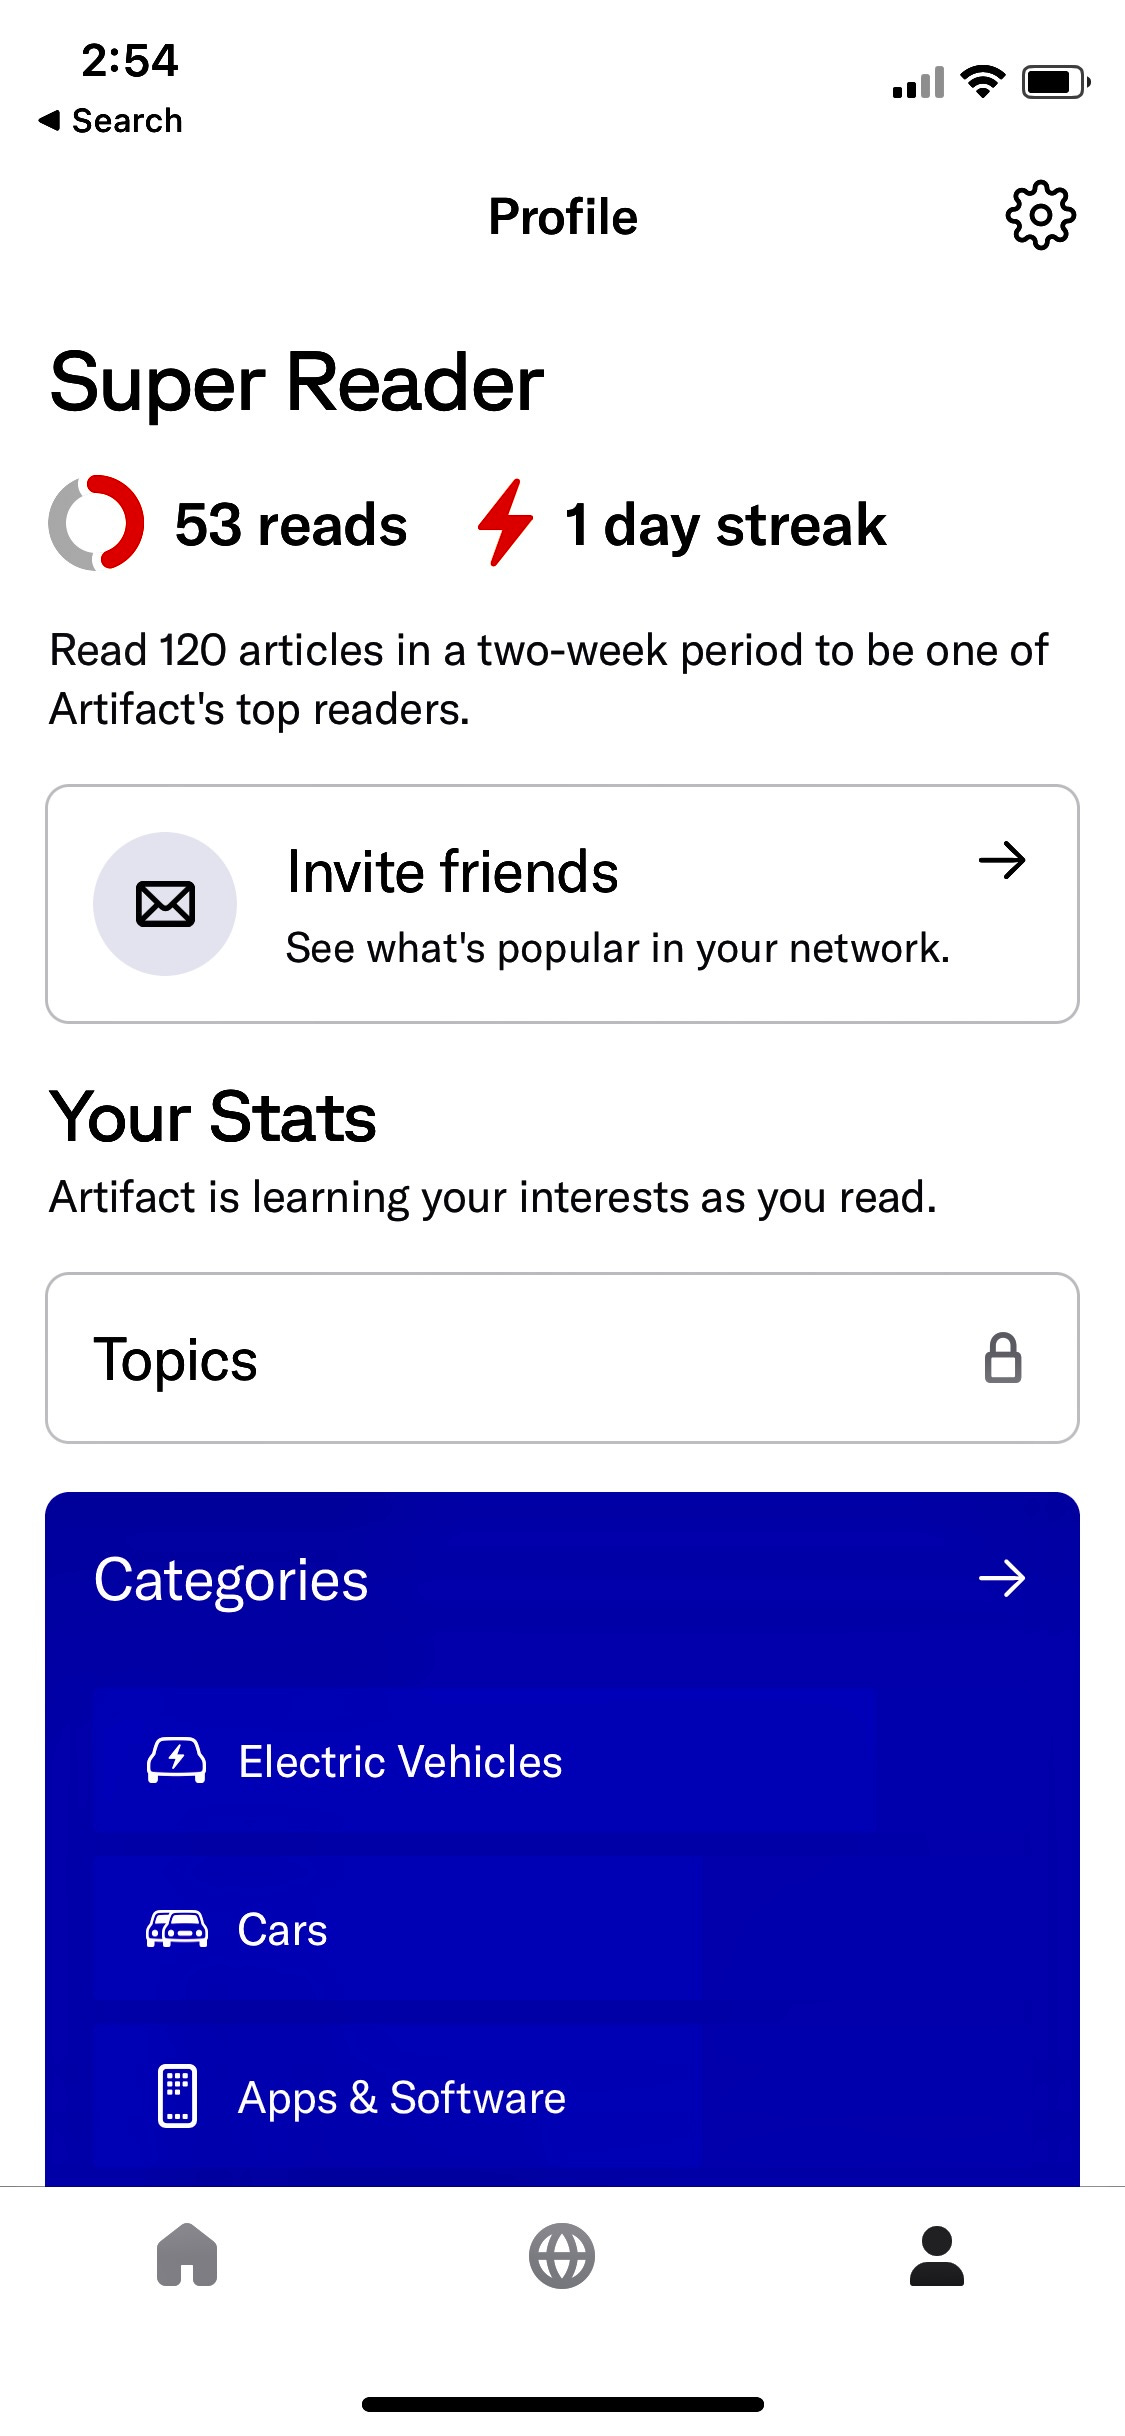 An image of the Artifact app from an iPhone